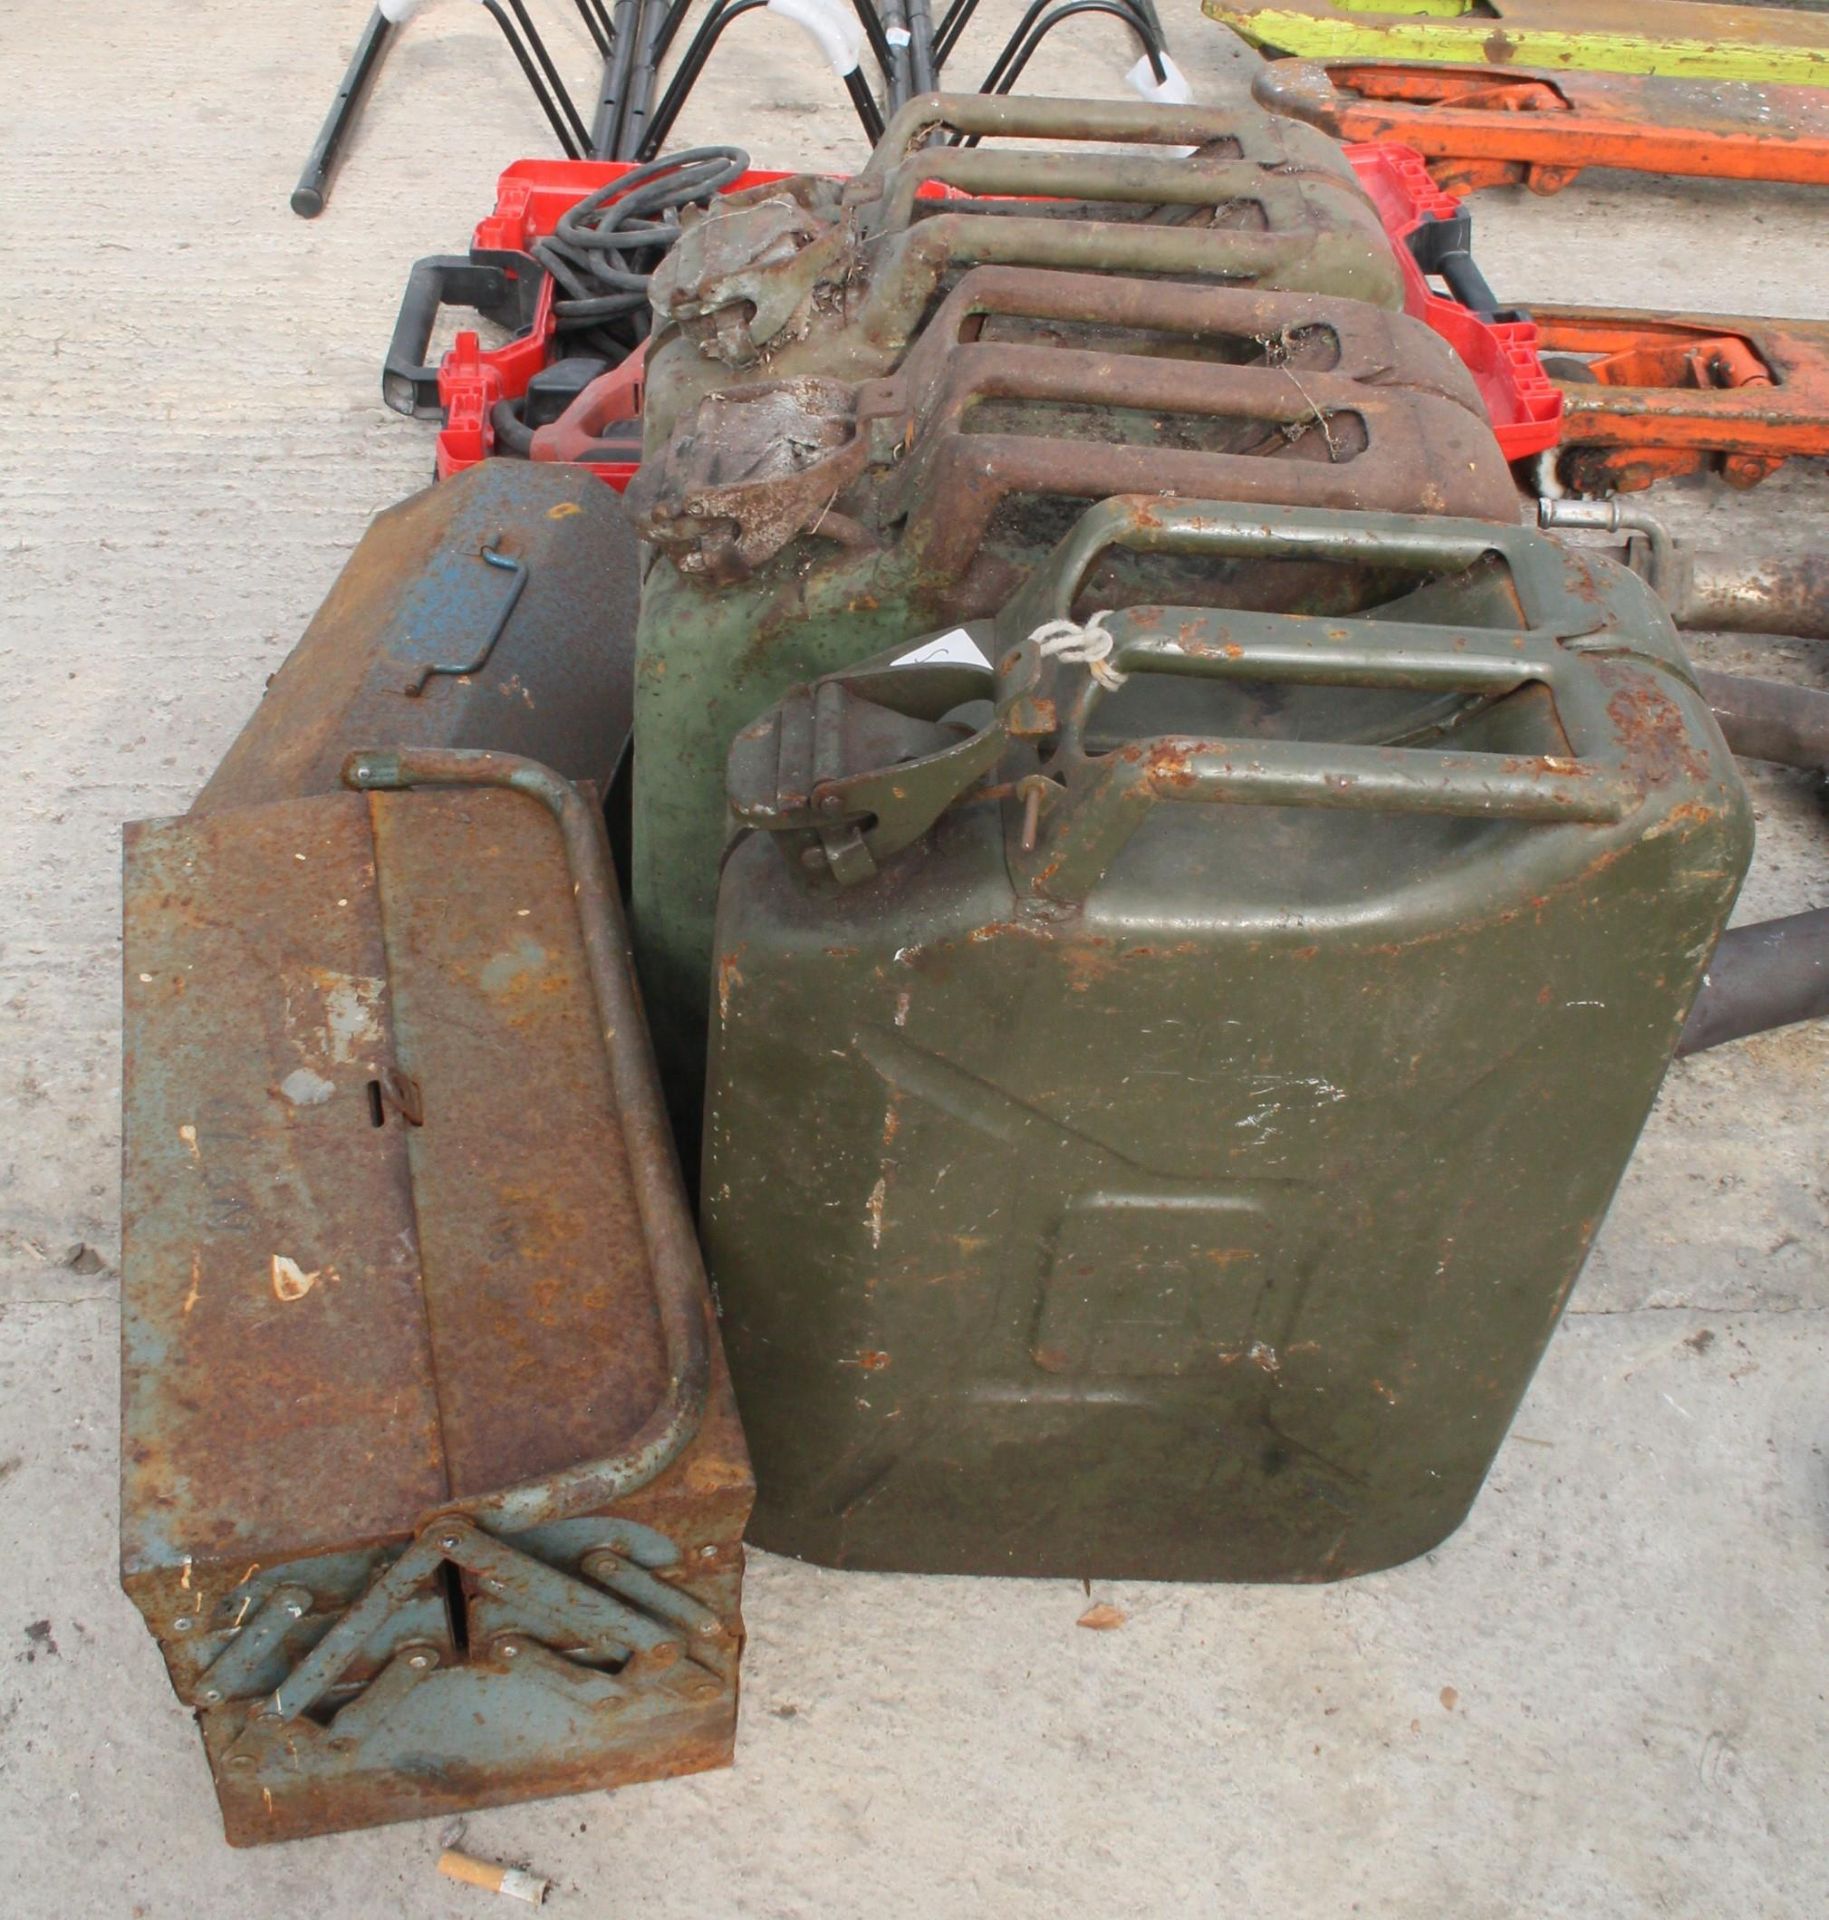 3 JERRY CANS AND TOOL BOXES NO VAT - Image 2 of 2